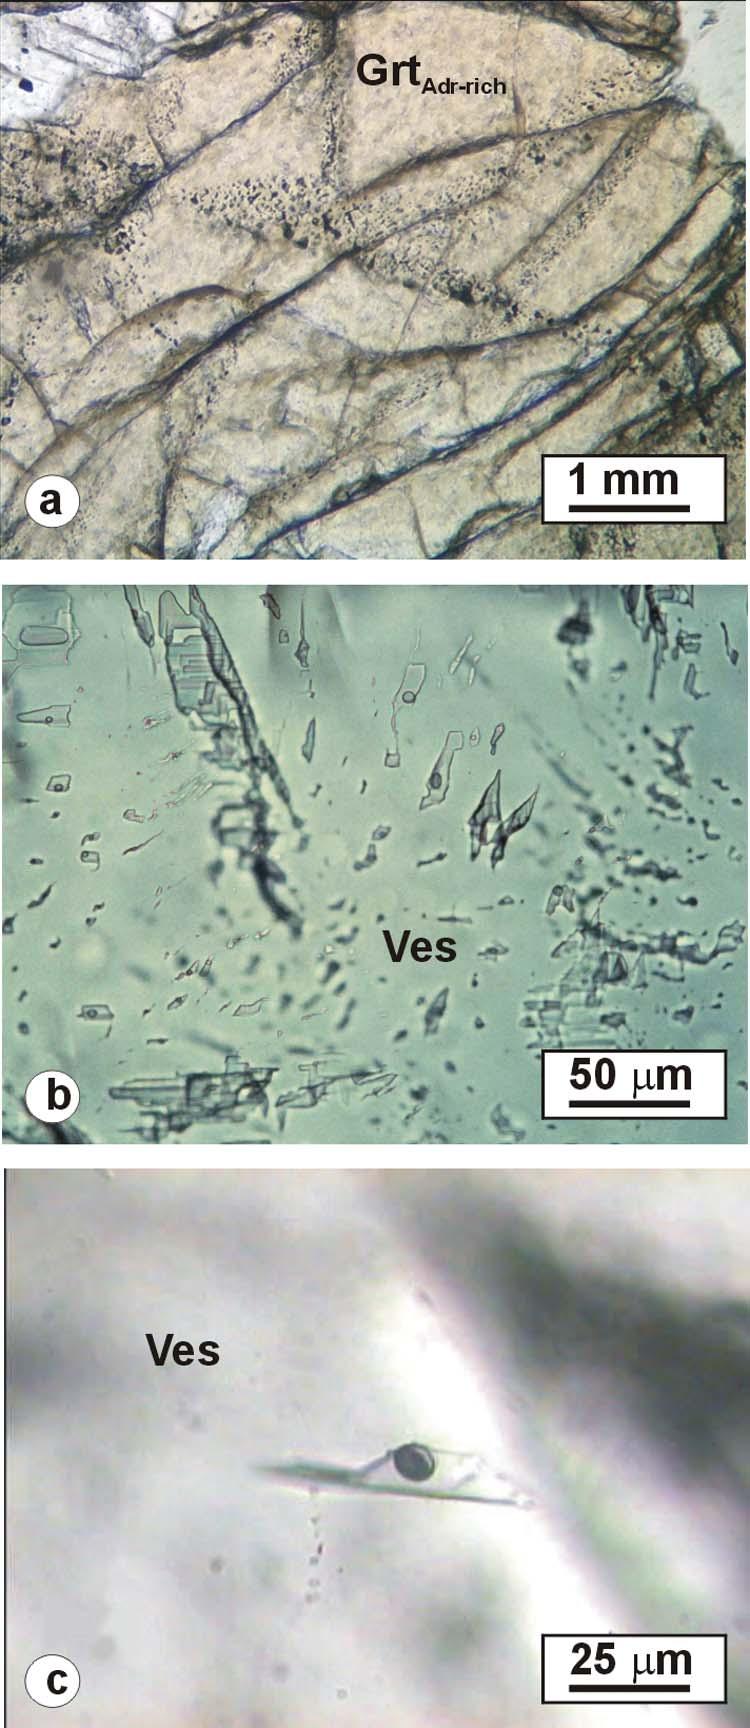 14 S. Ferrando et al. Figure 7. Photomicrographs of fluid inclusions within rodingitic veins. (a) Intragranular trails of two-phase fluid inclusions within andraditic garnet from Type III vein.